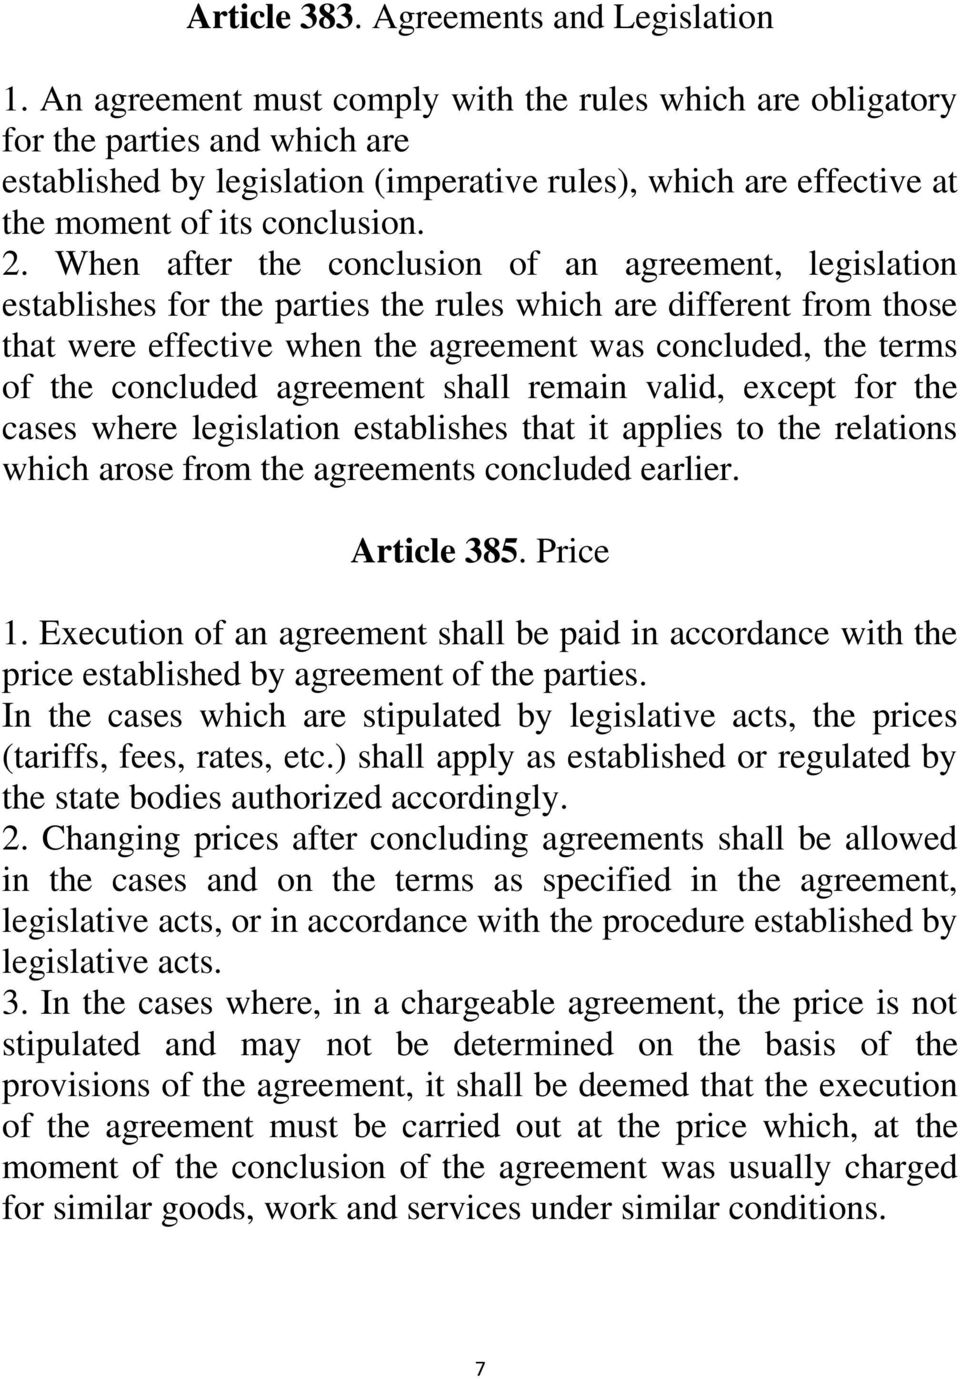 When after the conclusion of an agreement, legislation establishes for the parties the rules which are different from those that were effective when the agreement was concluded, the terms of the